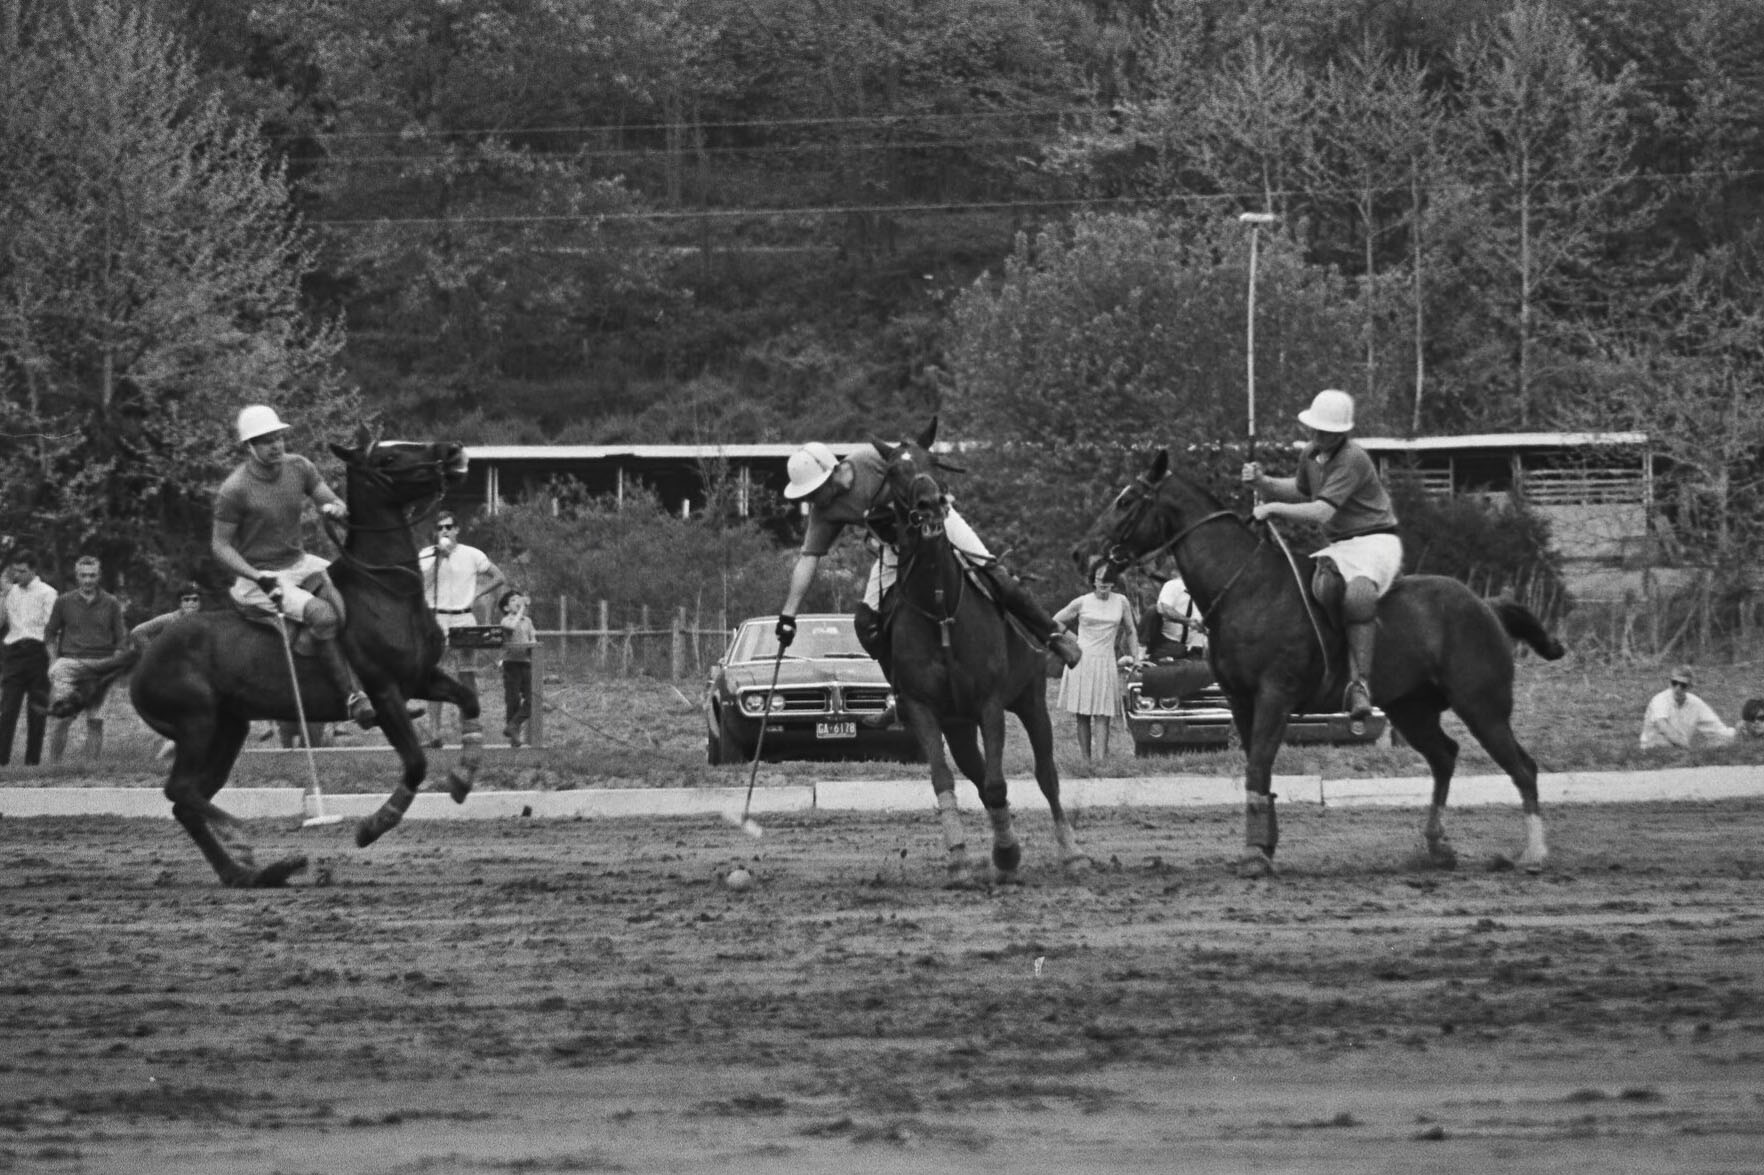 Three players vie for the ball on the club’s first field on property owned by engineering professor E. J. Oglesby at his Brook Hill Farm in the 1960s